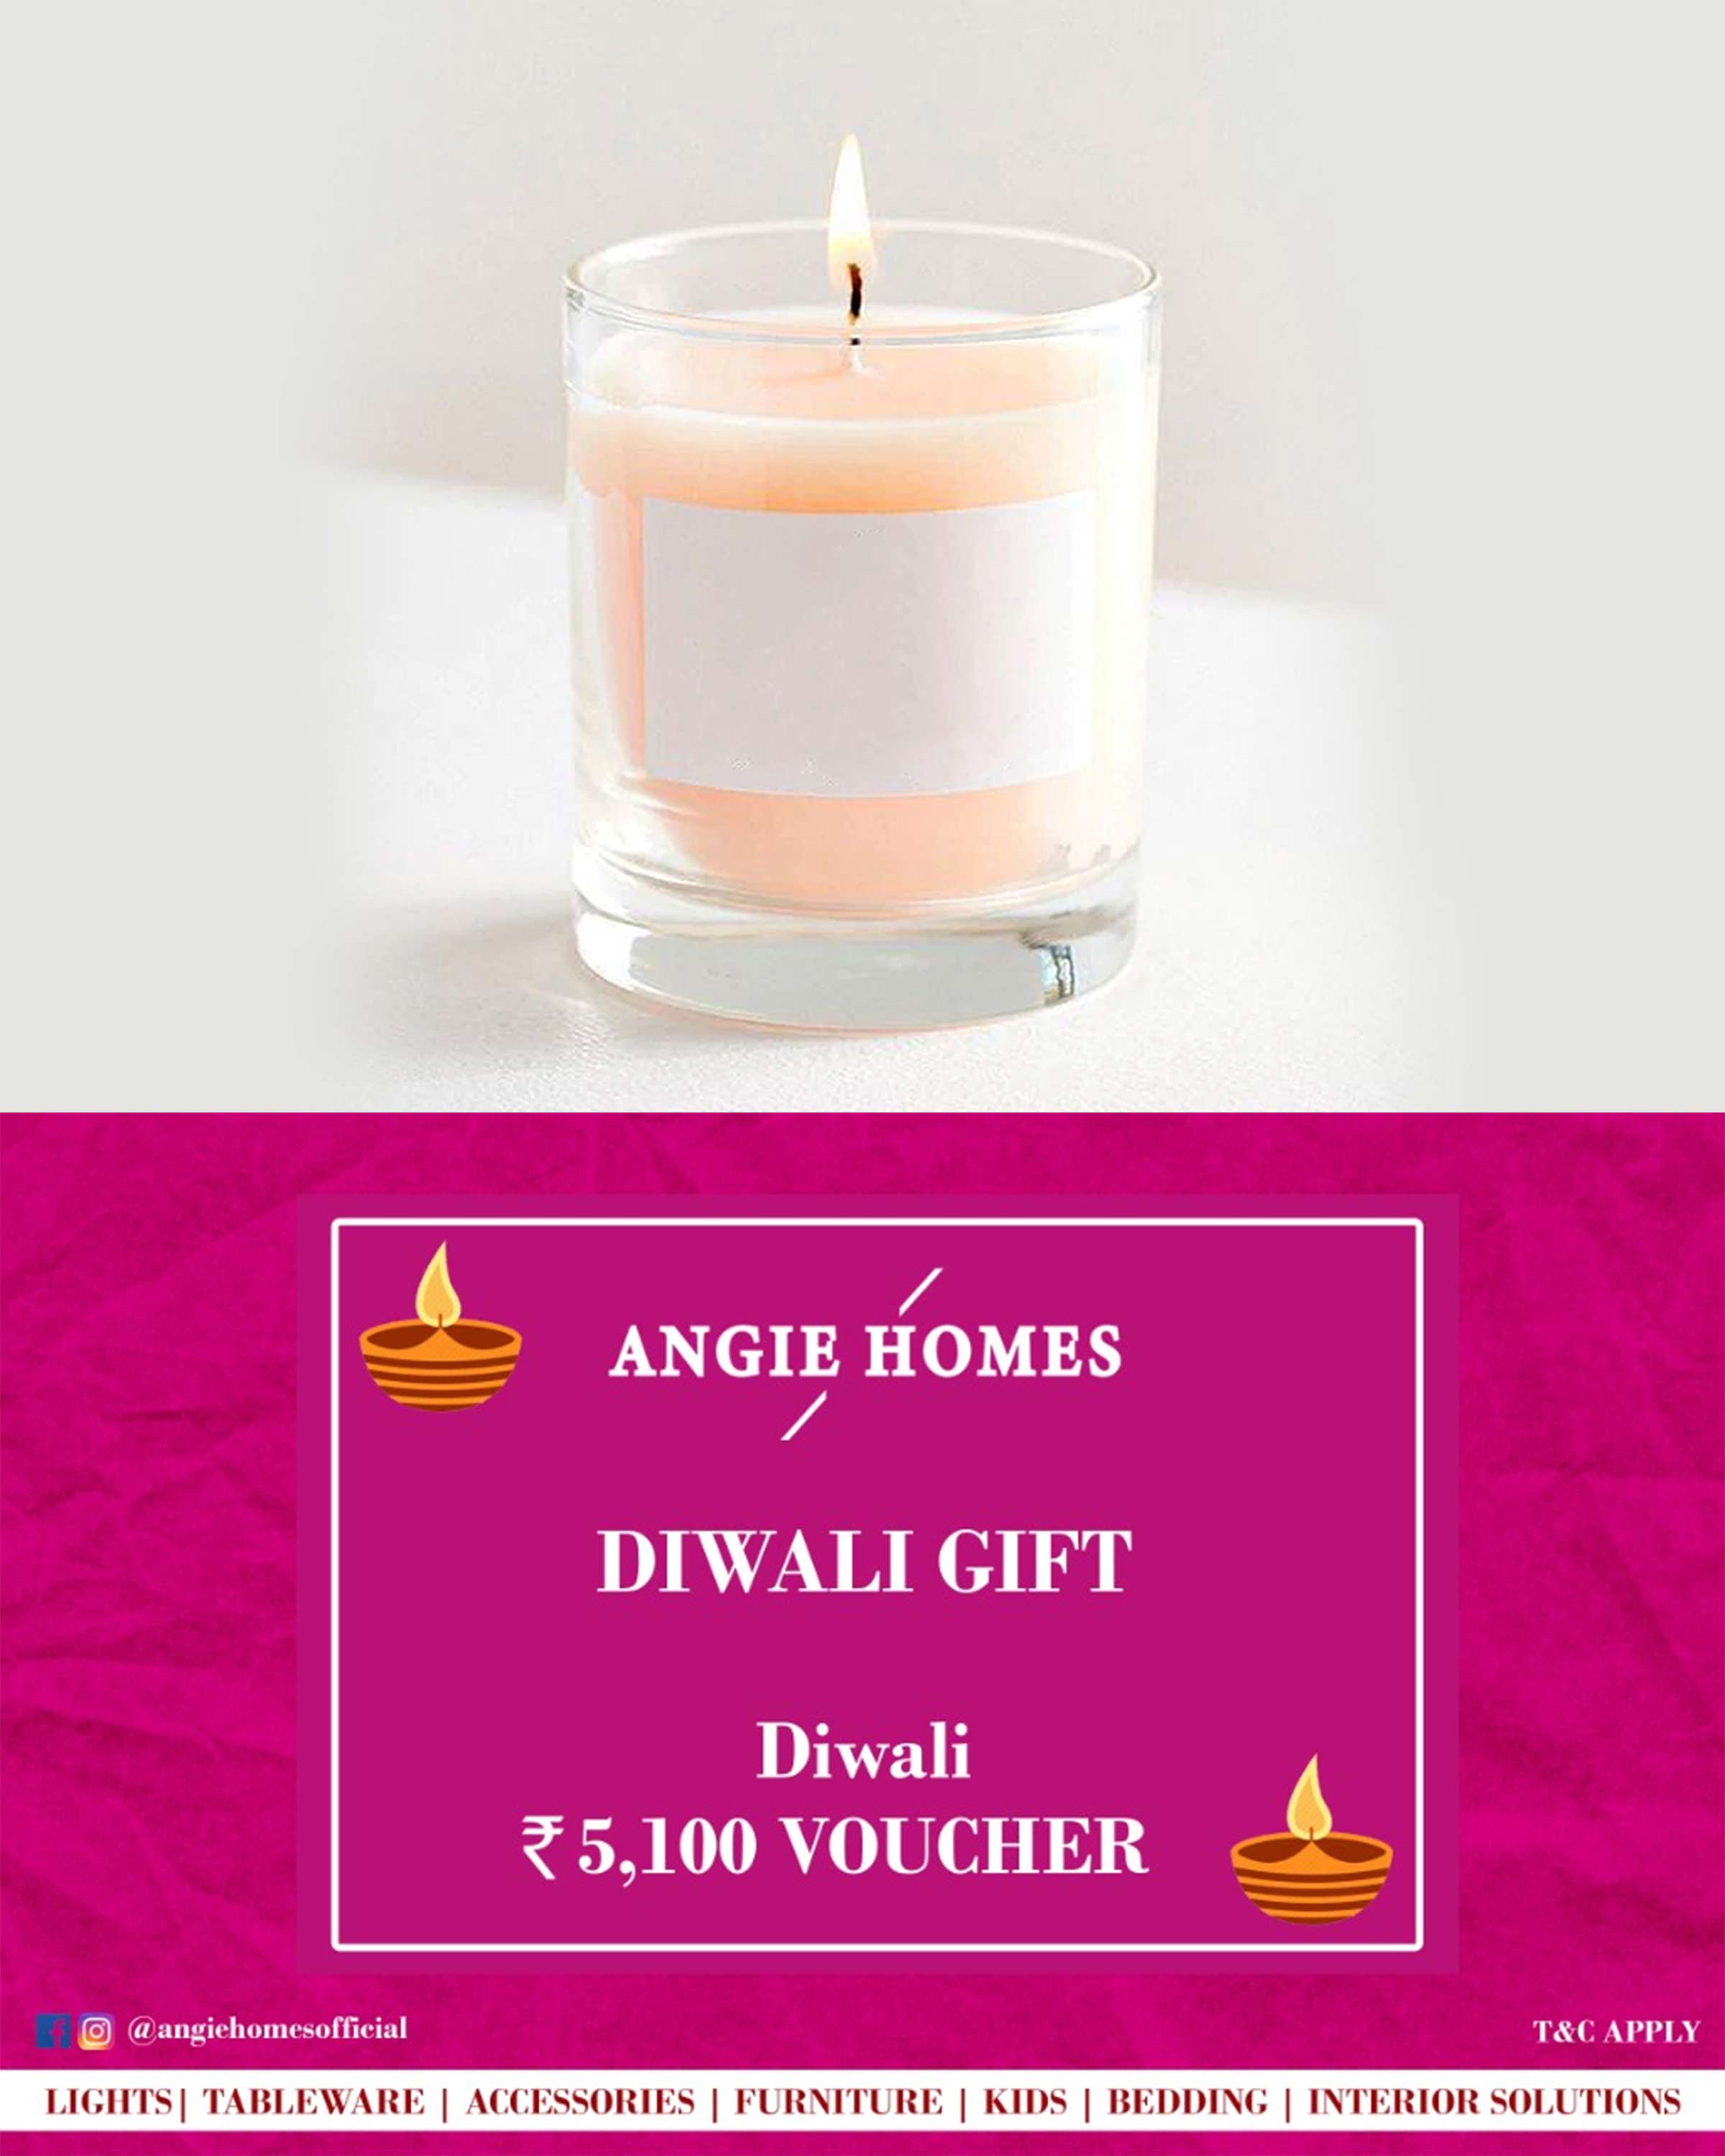 Online Diwali Gift Card Voucher for Candle | Home Decor Accessories ANGIE HOMES